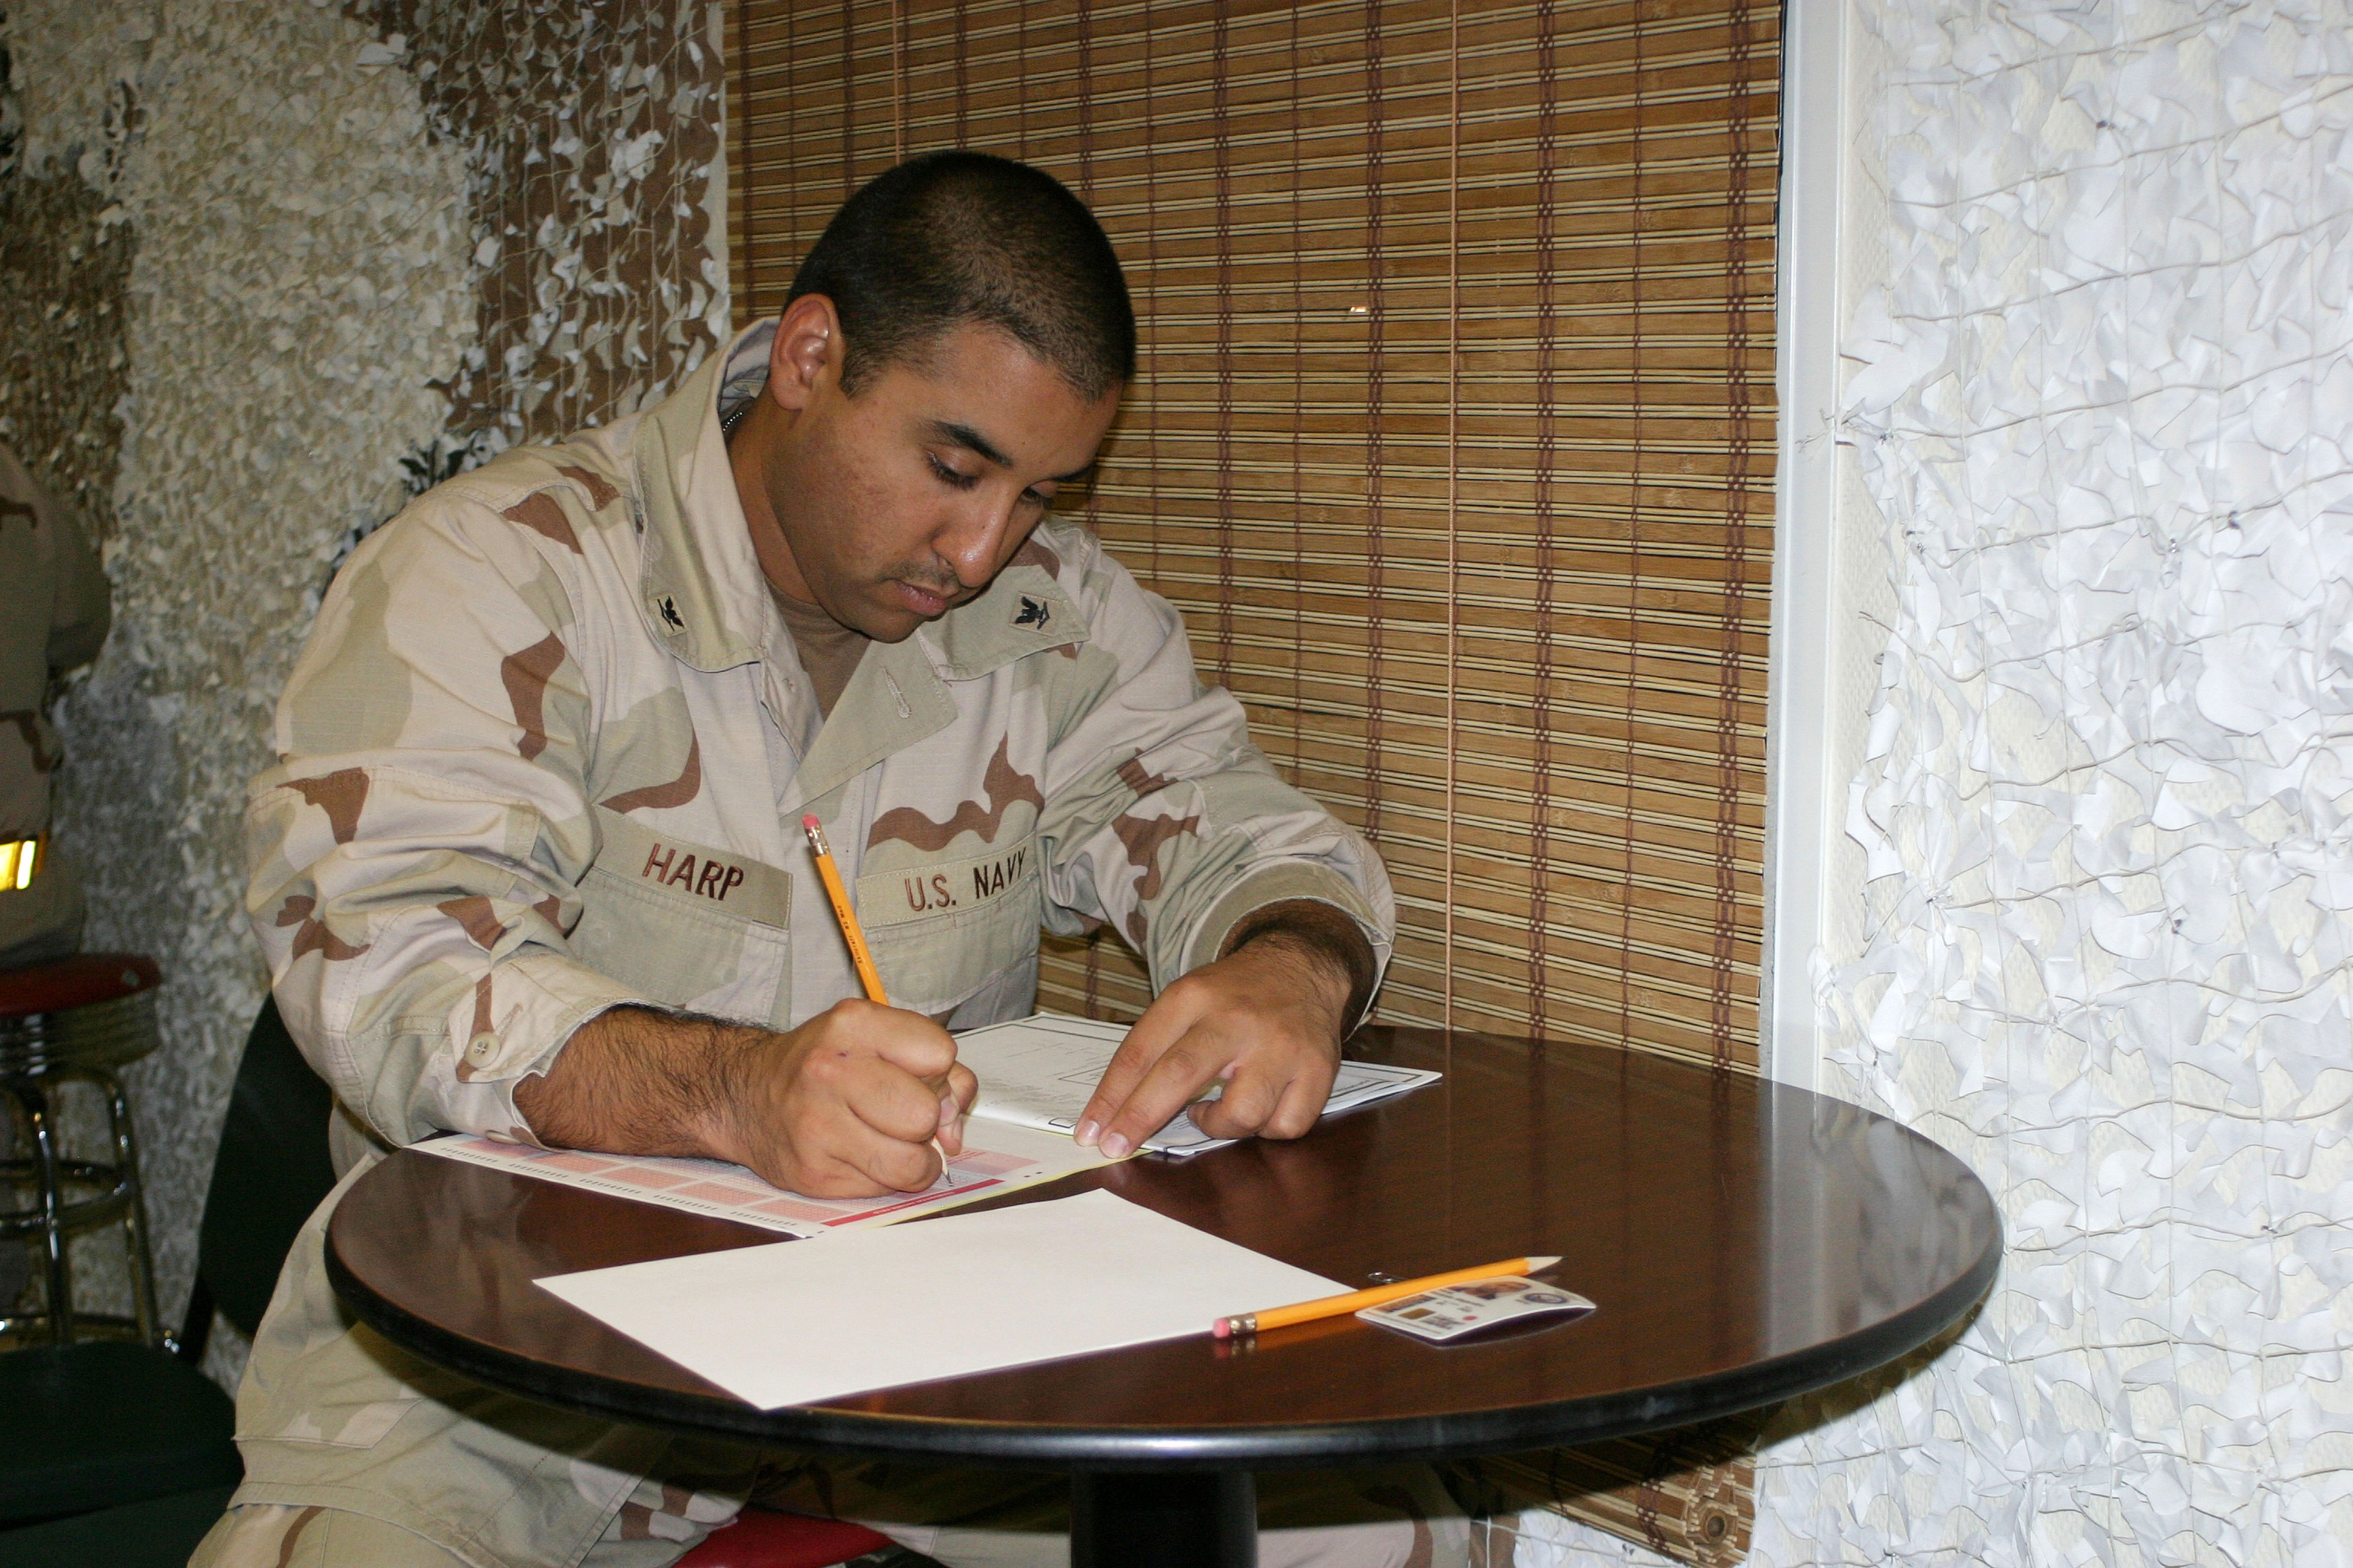 US Navy 060309-N-3207B-003 Culinary Specialist 3rd Class Ricardo Harp assigned to Patrol Squadron Four Seven (VP-47) participates in the E-5 Navy-wide Advancement Exam